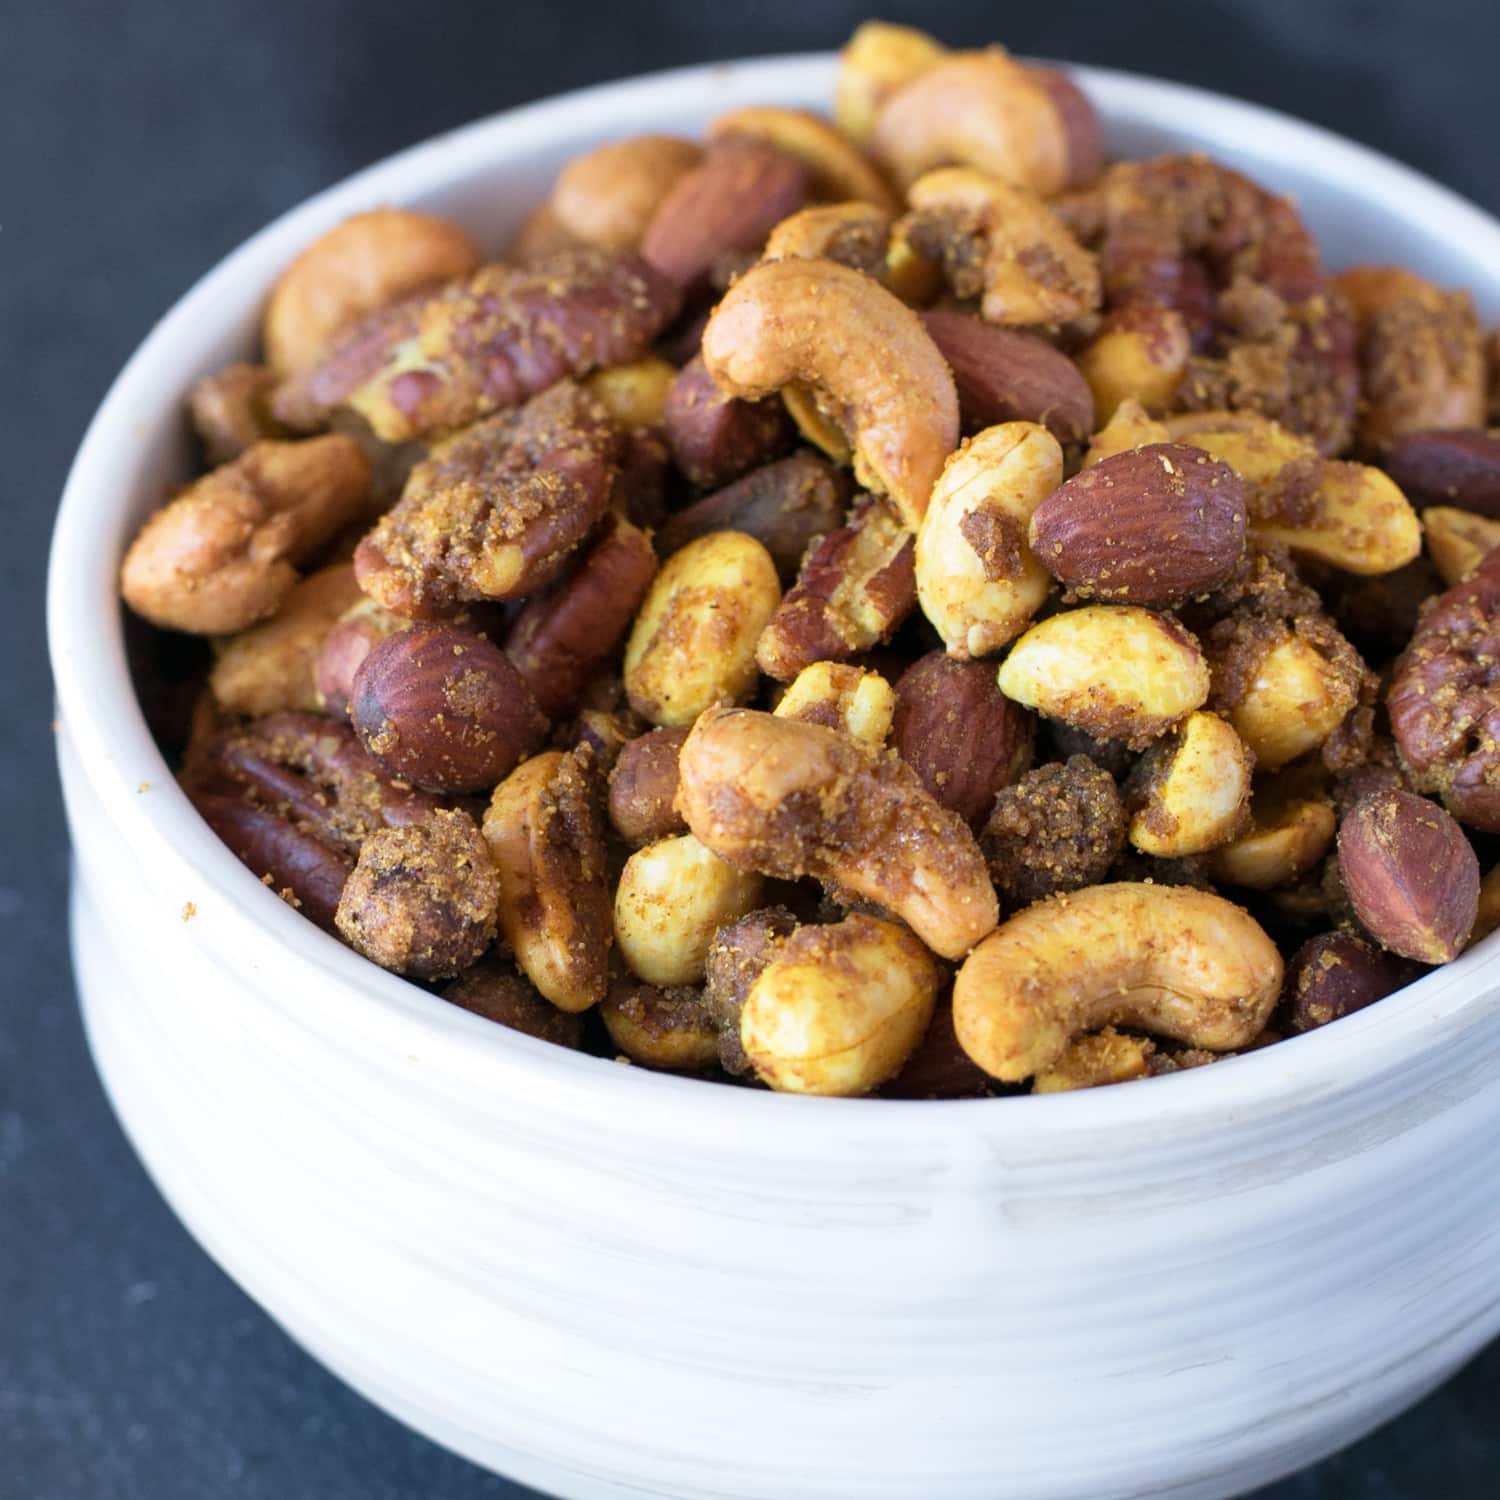 Curried Nut Mix | cakenknife.com #snack #trailmix #recipe